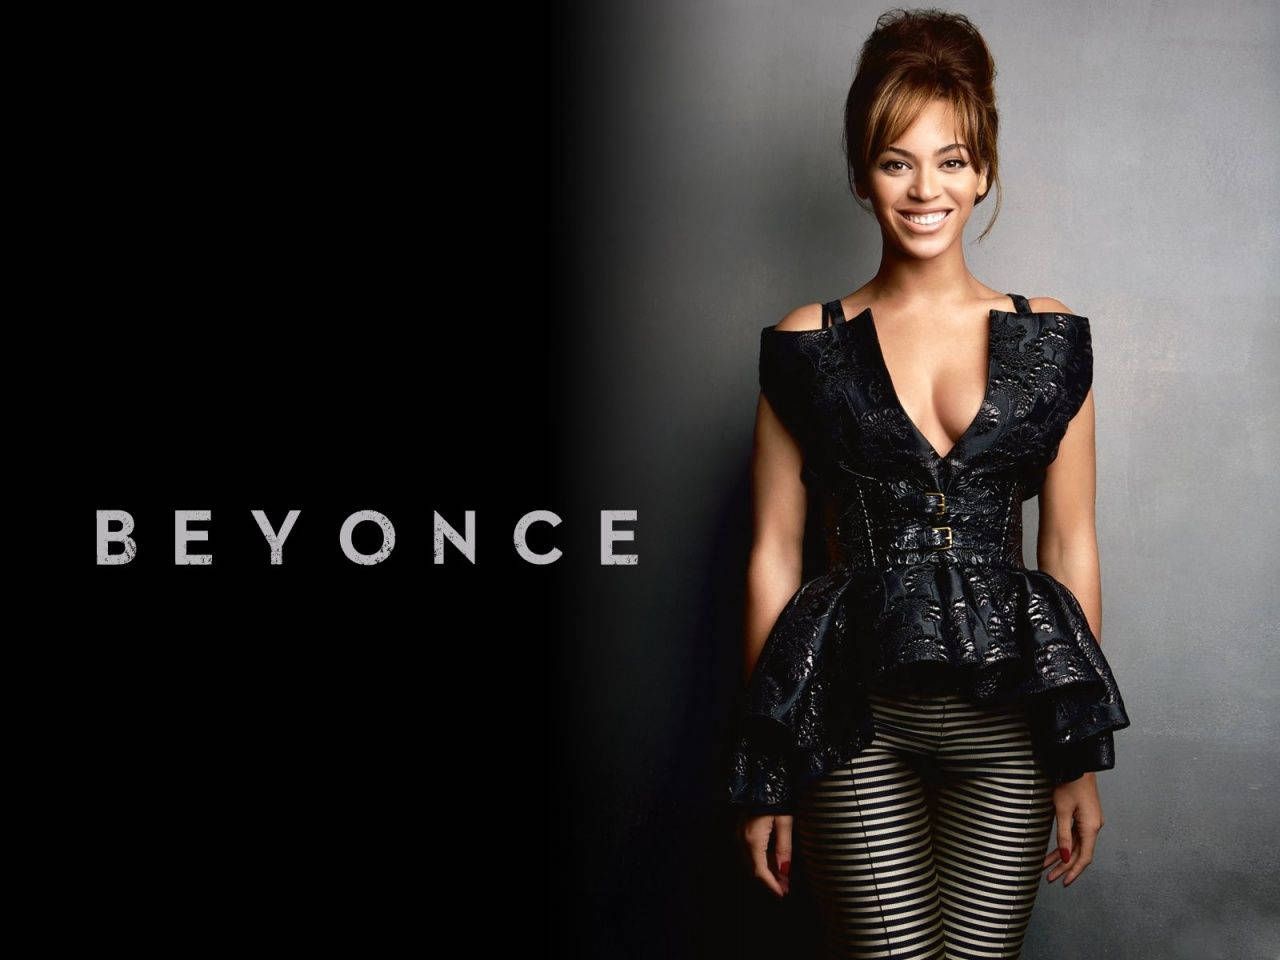 Cheerful Beyonce In Black Outfit Background